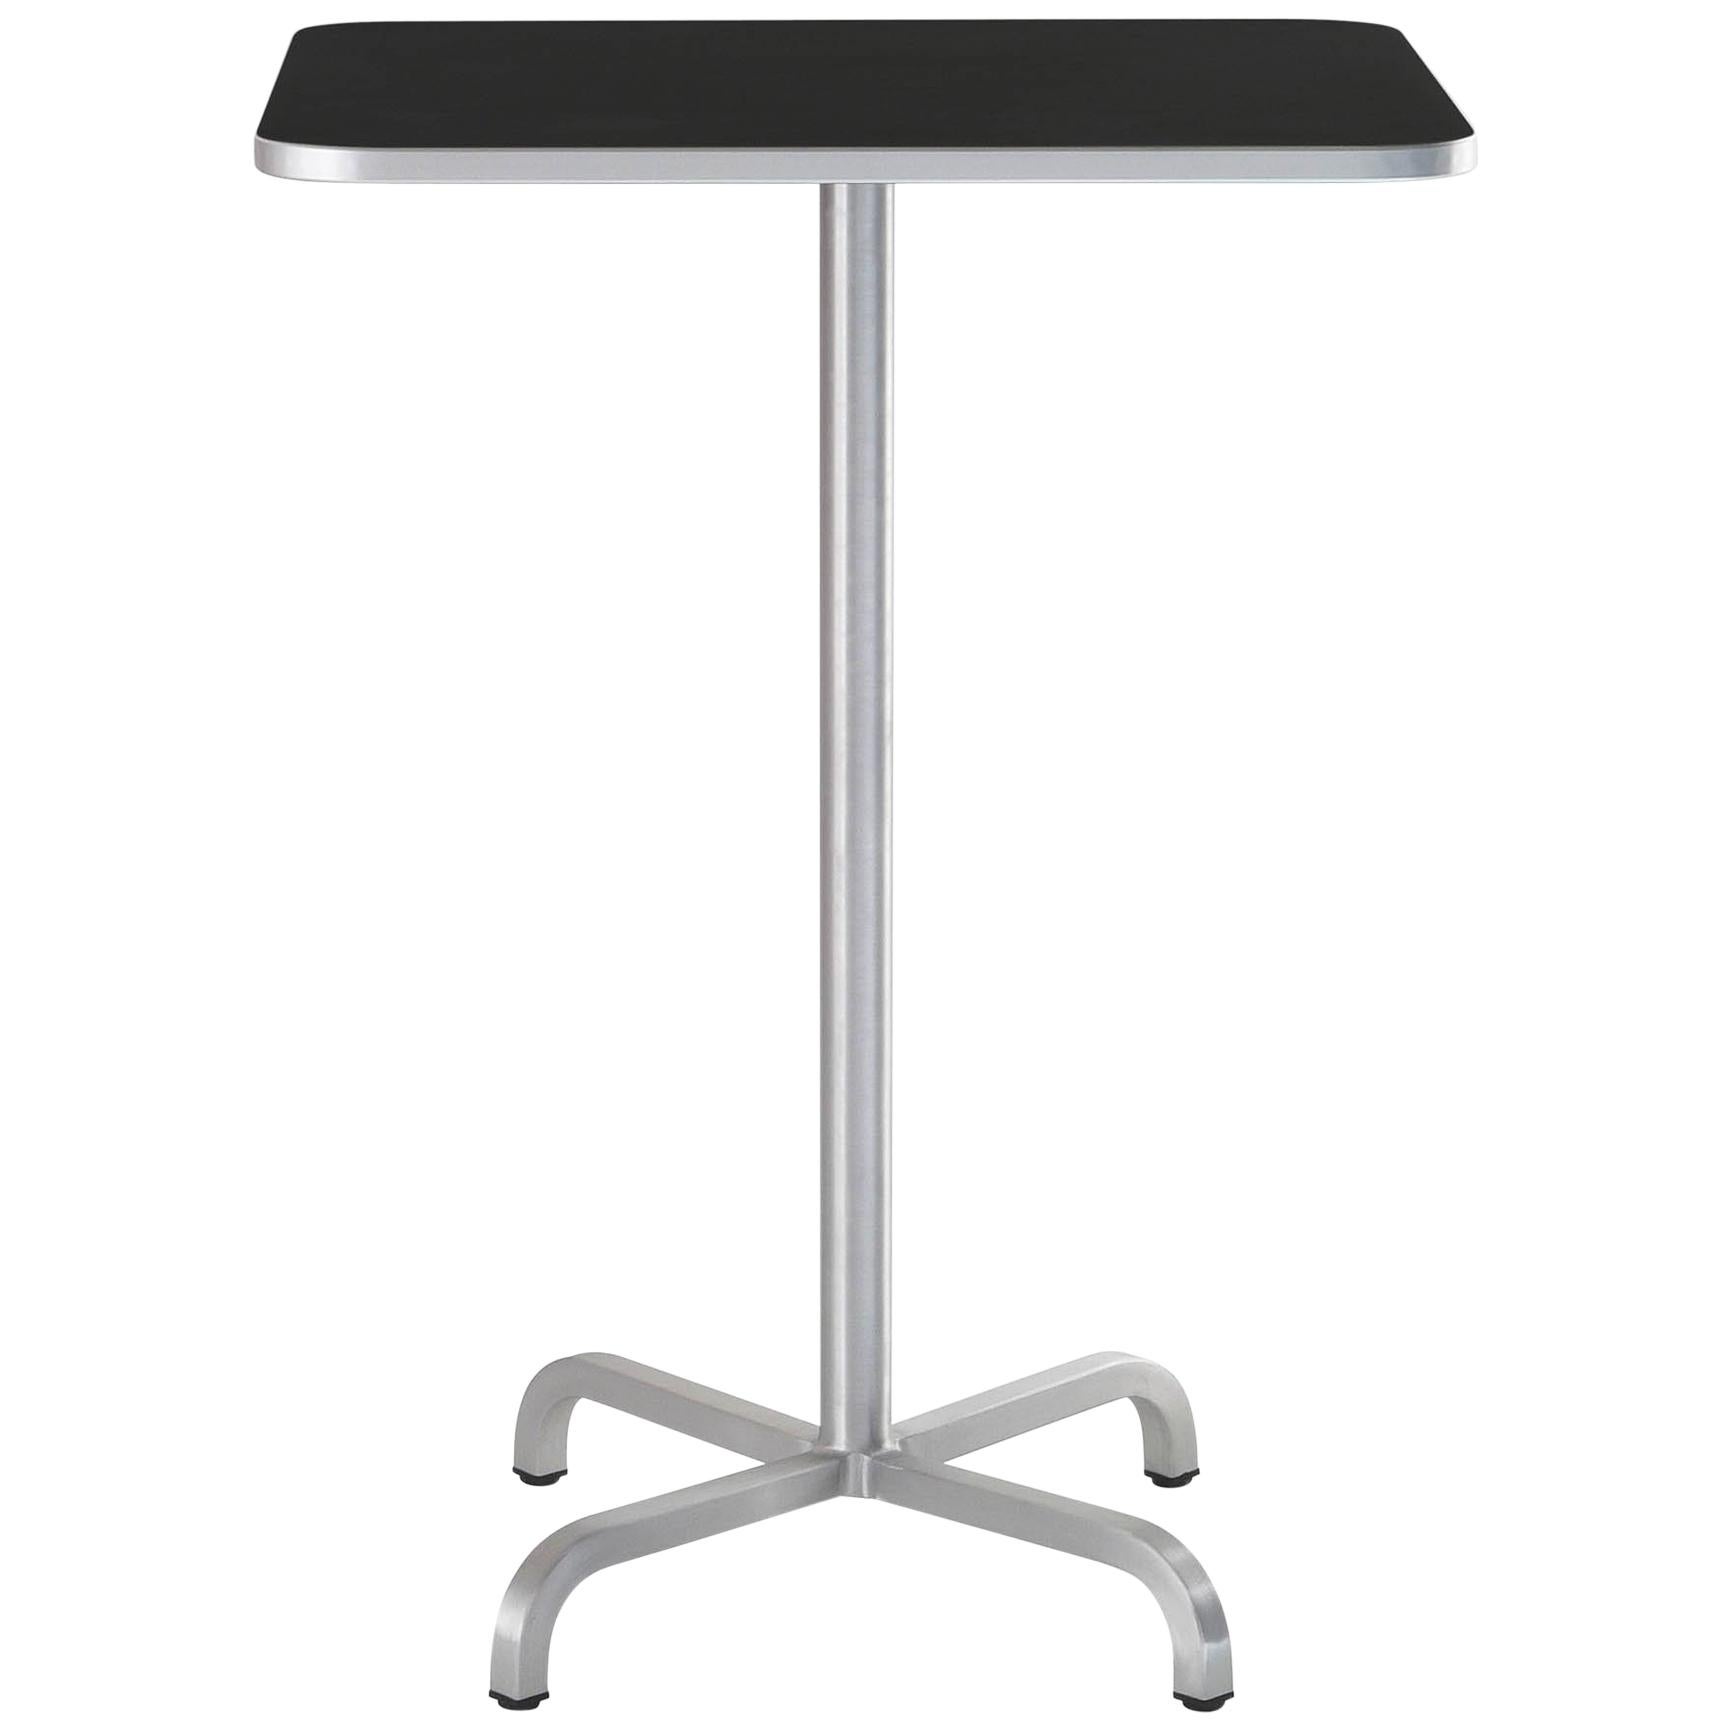 Emeco 20-06 Large Square Bar Table with Black Laminate Top by Norman Foster For Sale